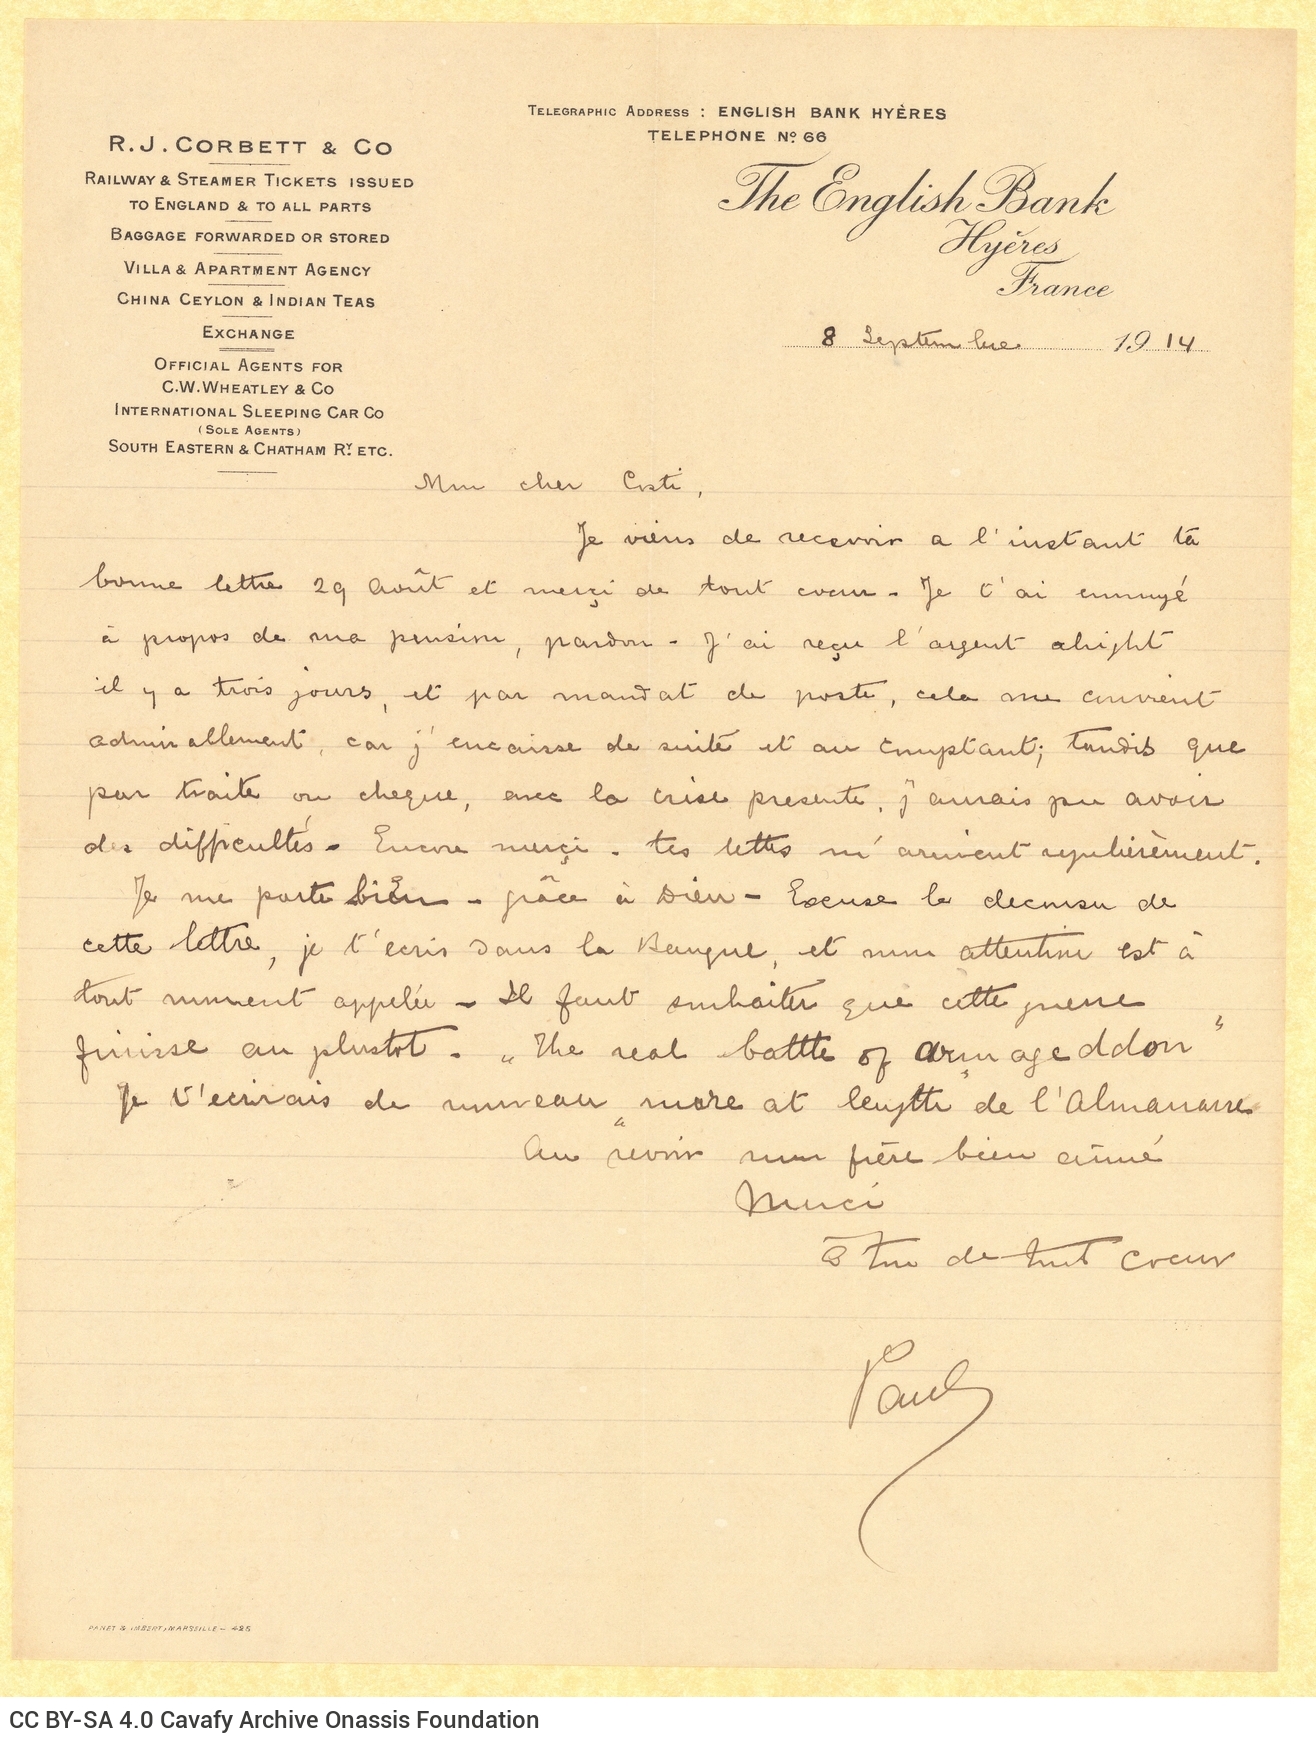 Handwritten letter by Paul Cavafy to C. P. Cavafy from Hyères, France, according to the letterhead. It is a reply to a lette